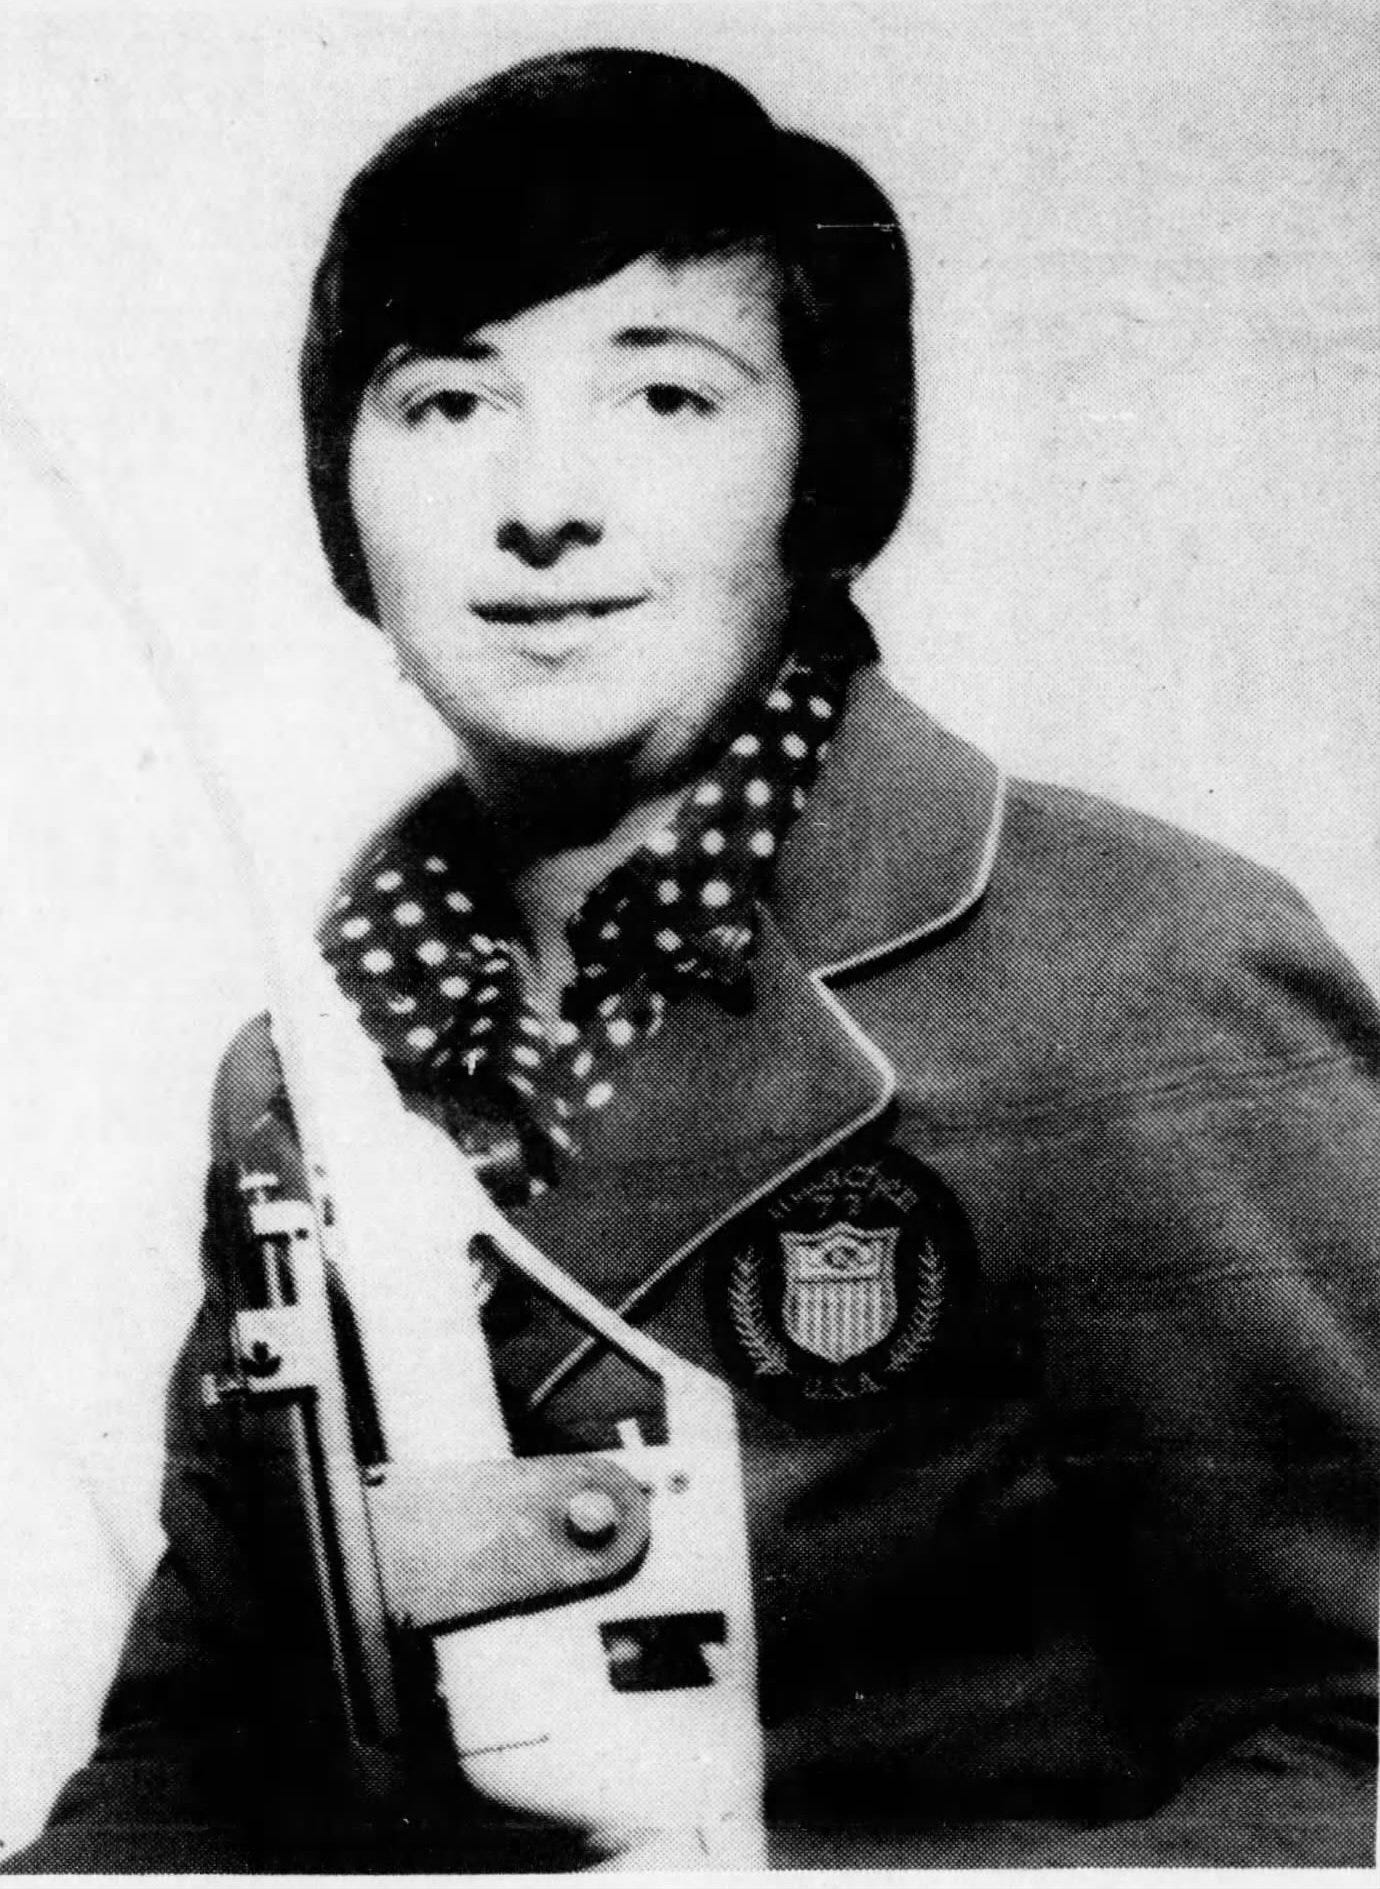 World Archery champion Linda Myers was inducted into the York Area Sports Hall of Fame in 1974, a year after the organization was started.